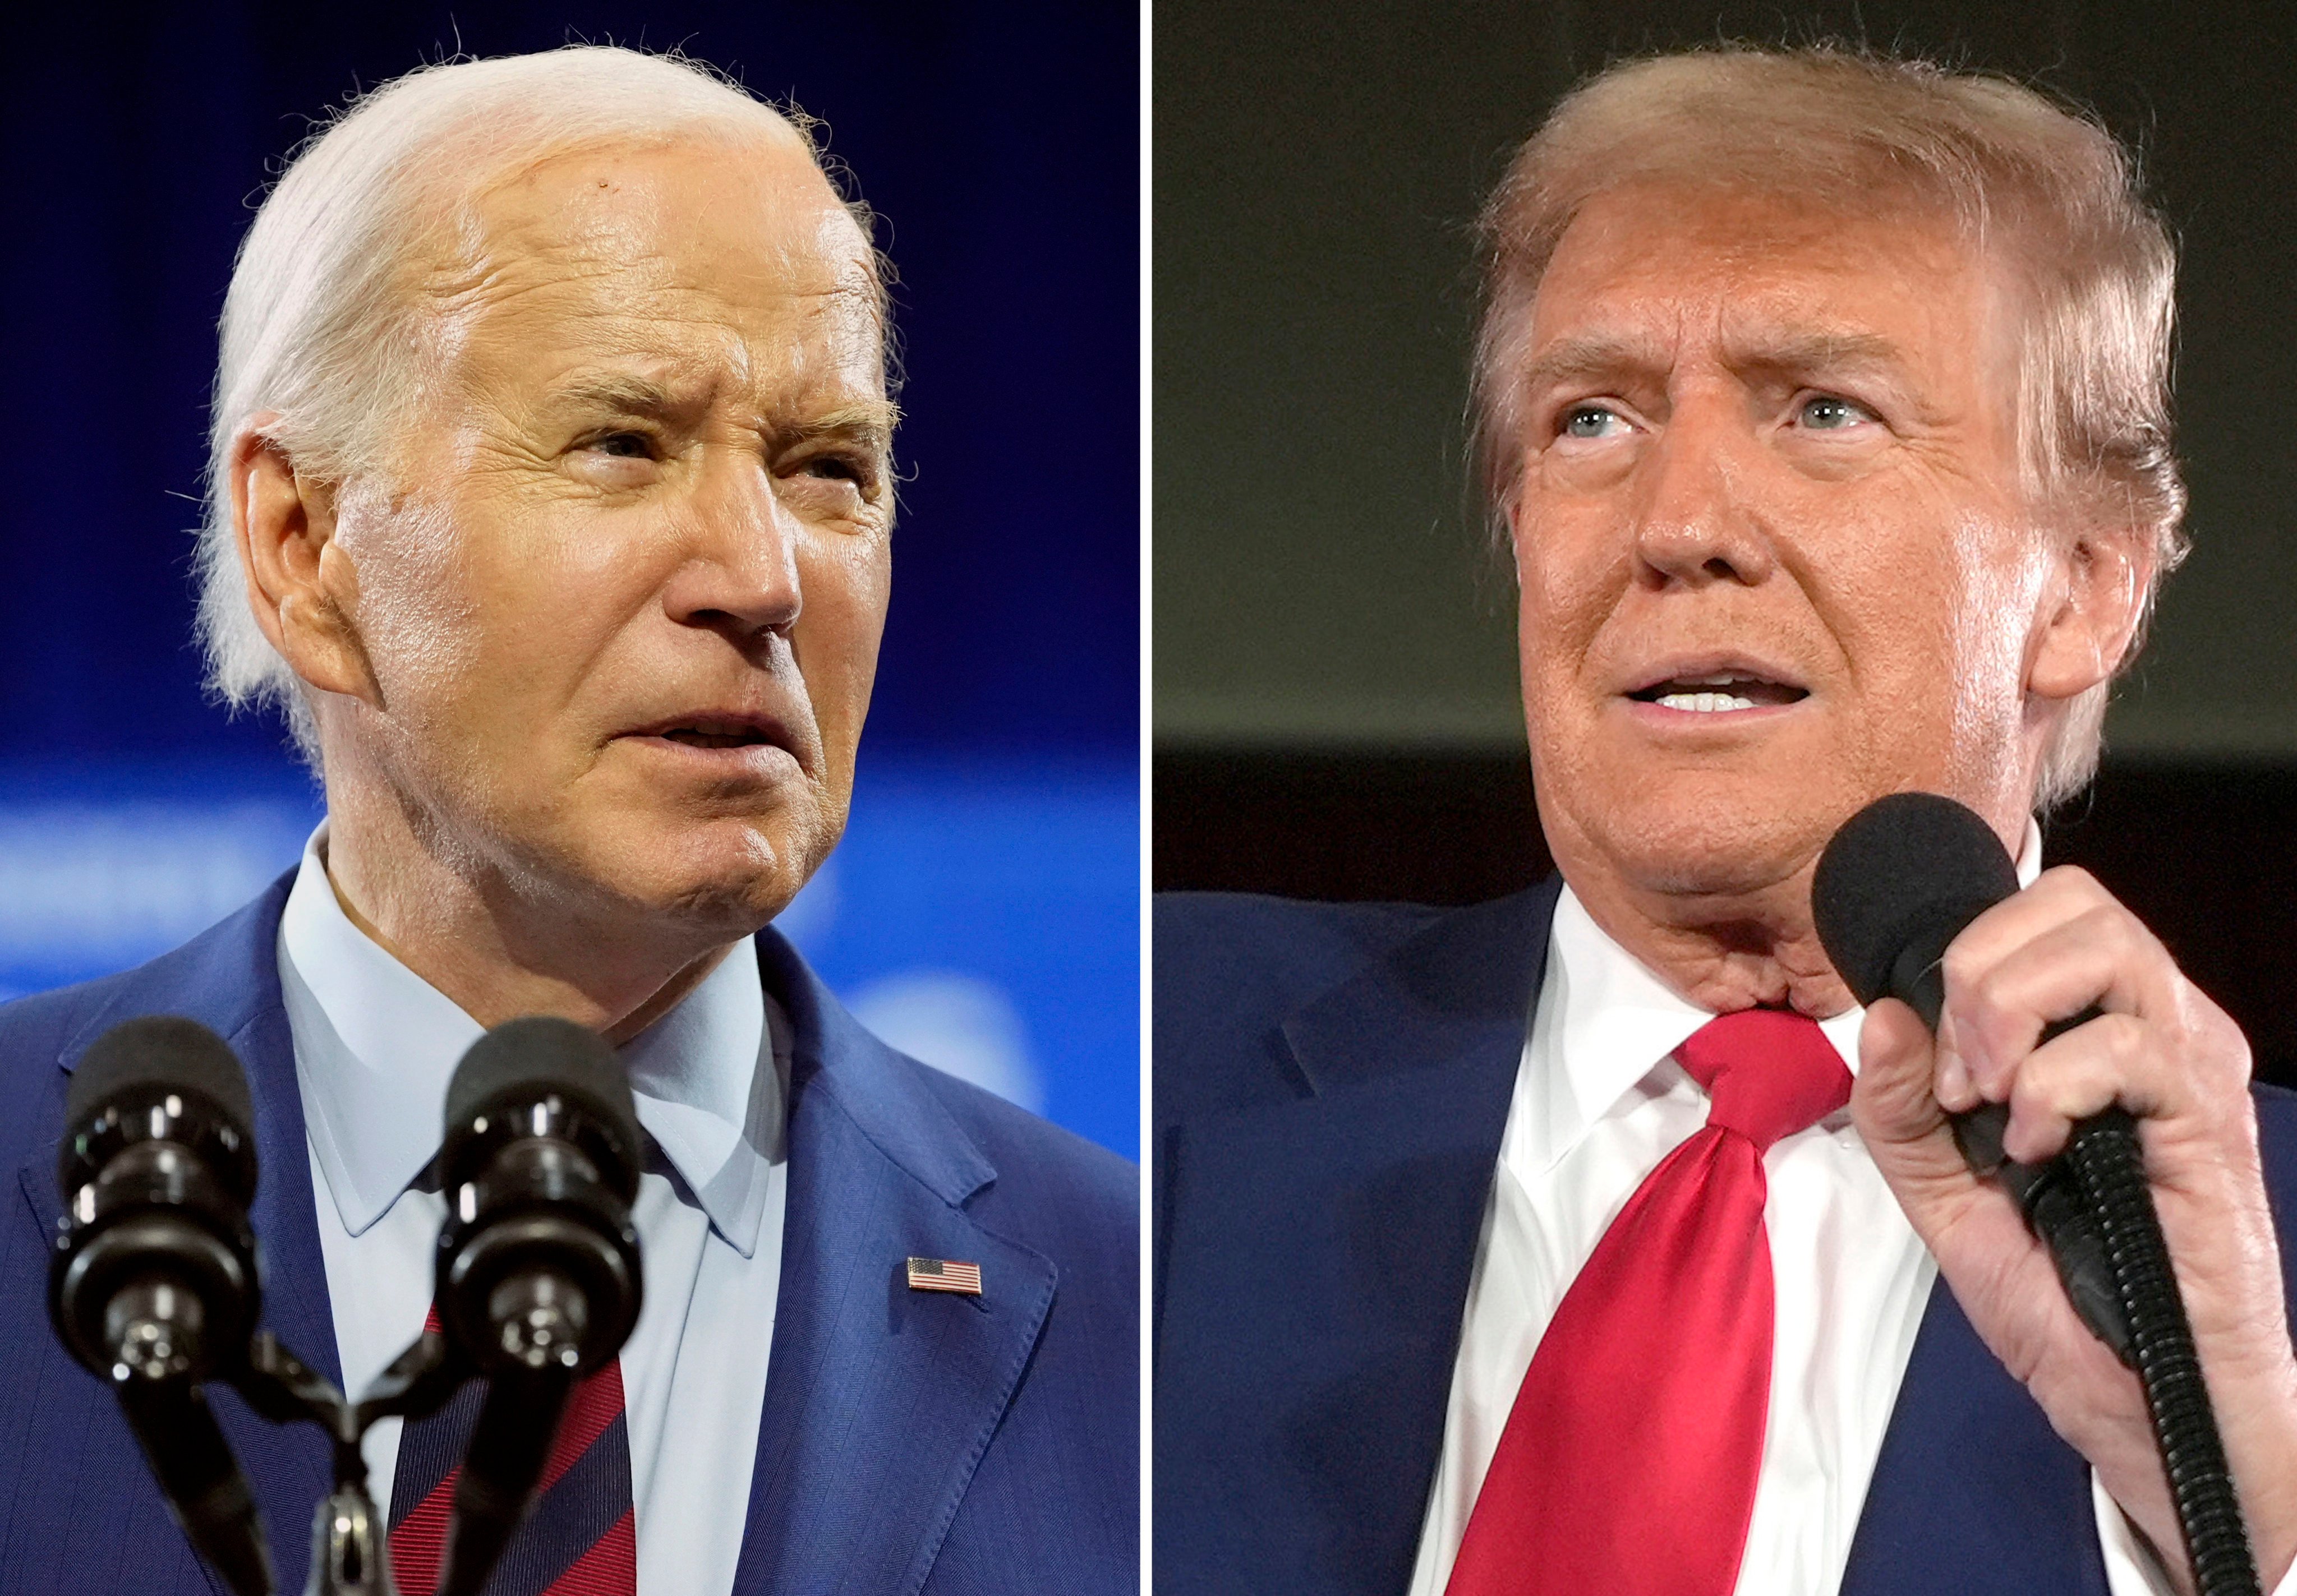 The agreement between US President Joe Biden and Republican challenger Donald Trump ends months of uncertainty over whether the candidates would debate at all. Photos: AP